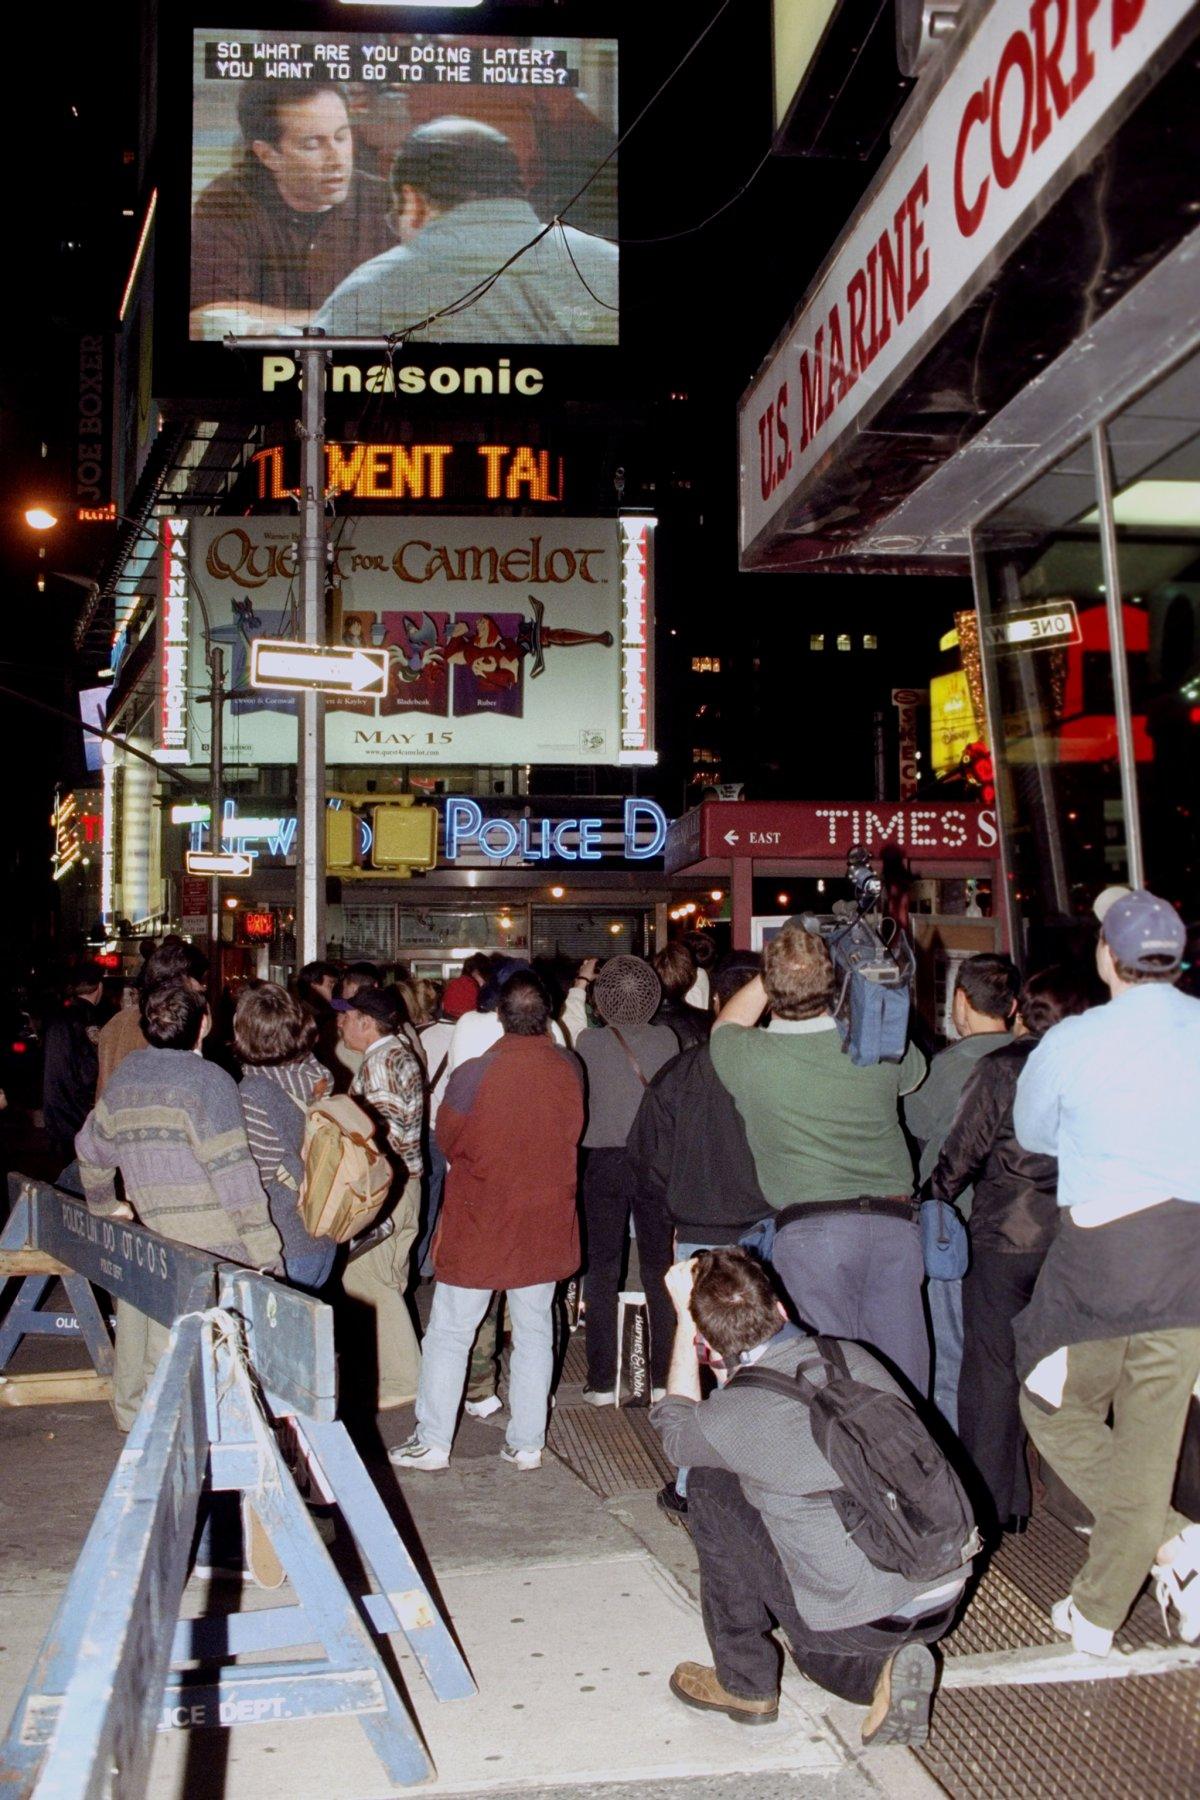 New Yorkers stop to watch the “Seinfeld” finale in Times Square - May 14, 1998.jpg